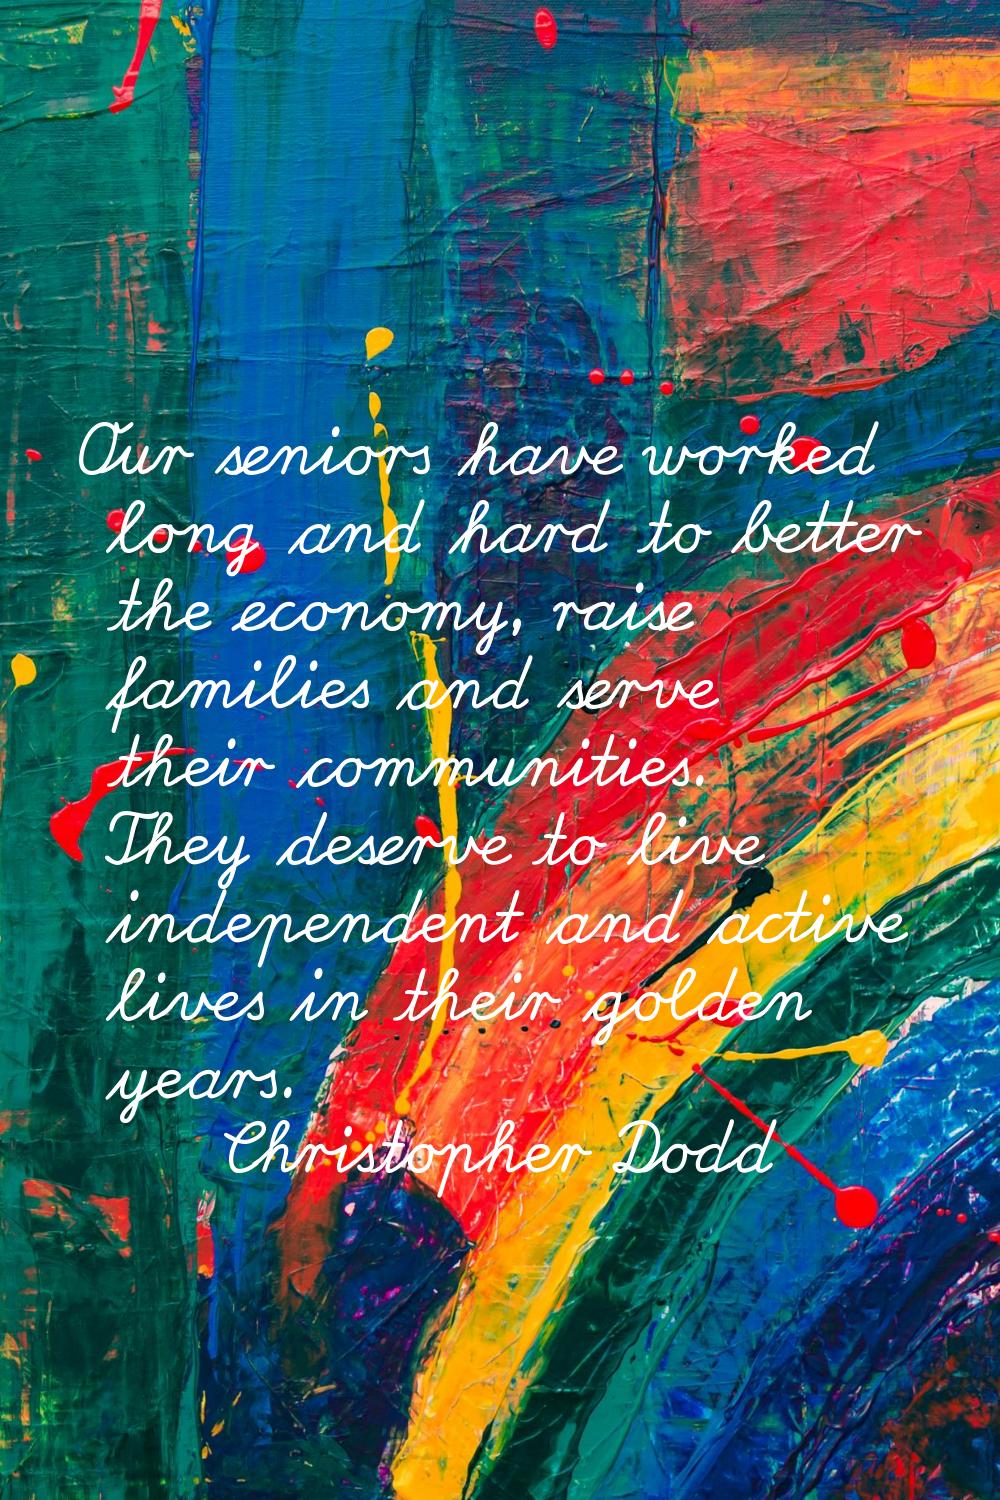 Our seniors have worked long and hard to better the economy, raise families and serve their communi